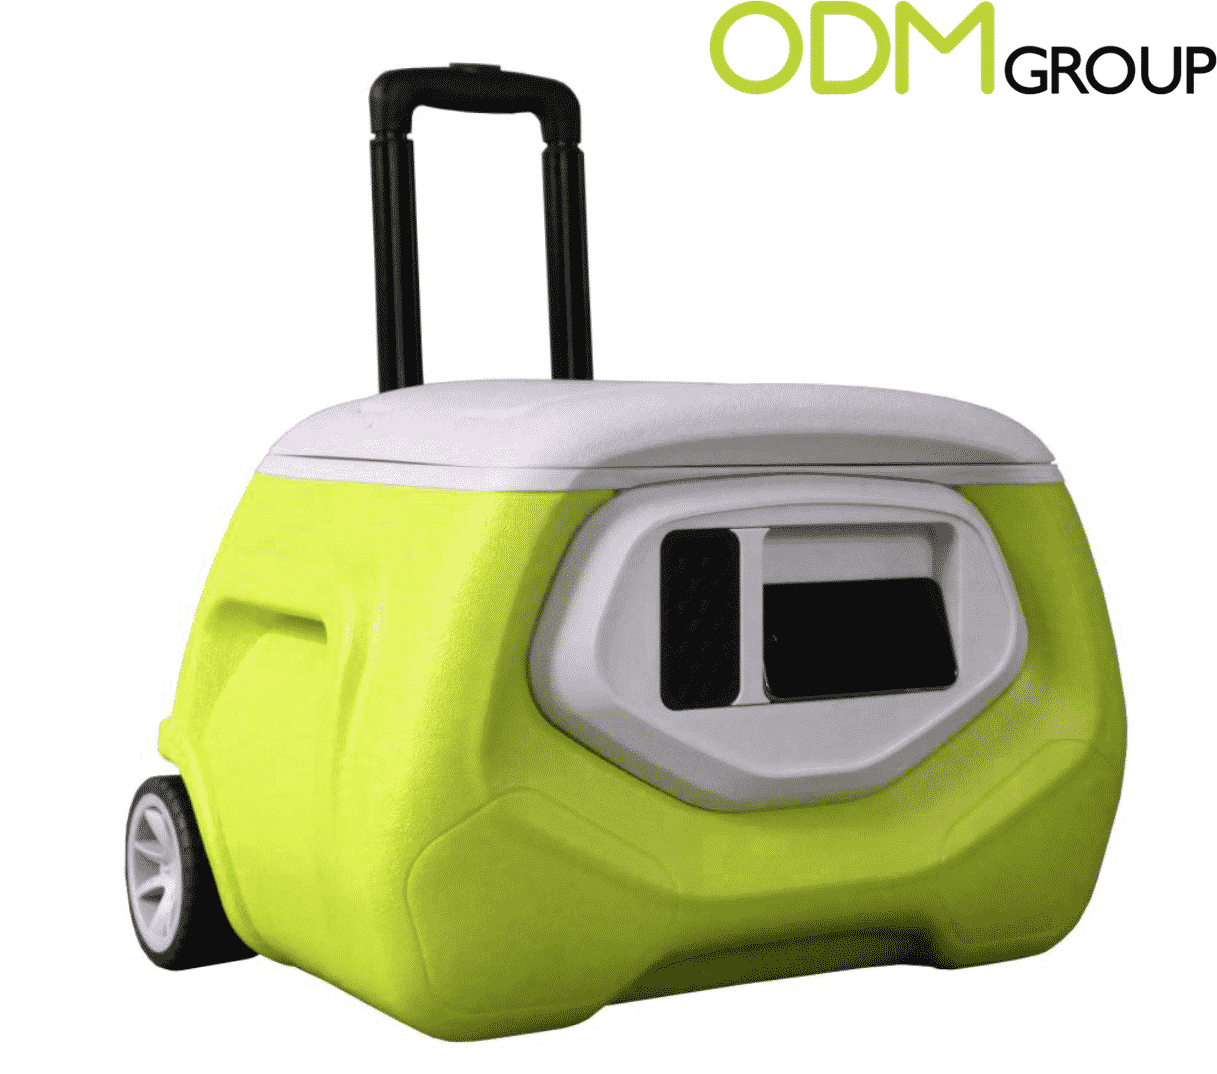 Branded Cooler Box With Speakers Perfect For Summer Events